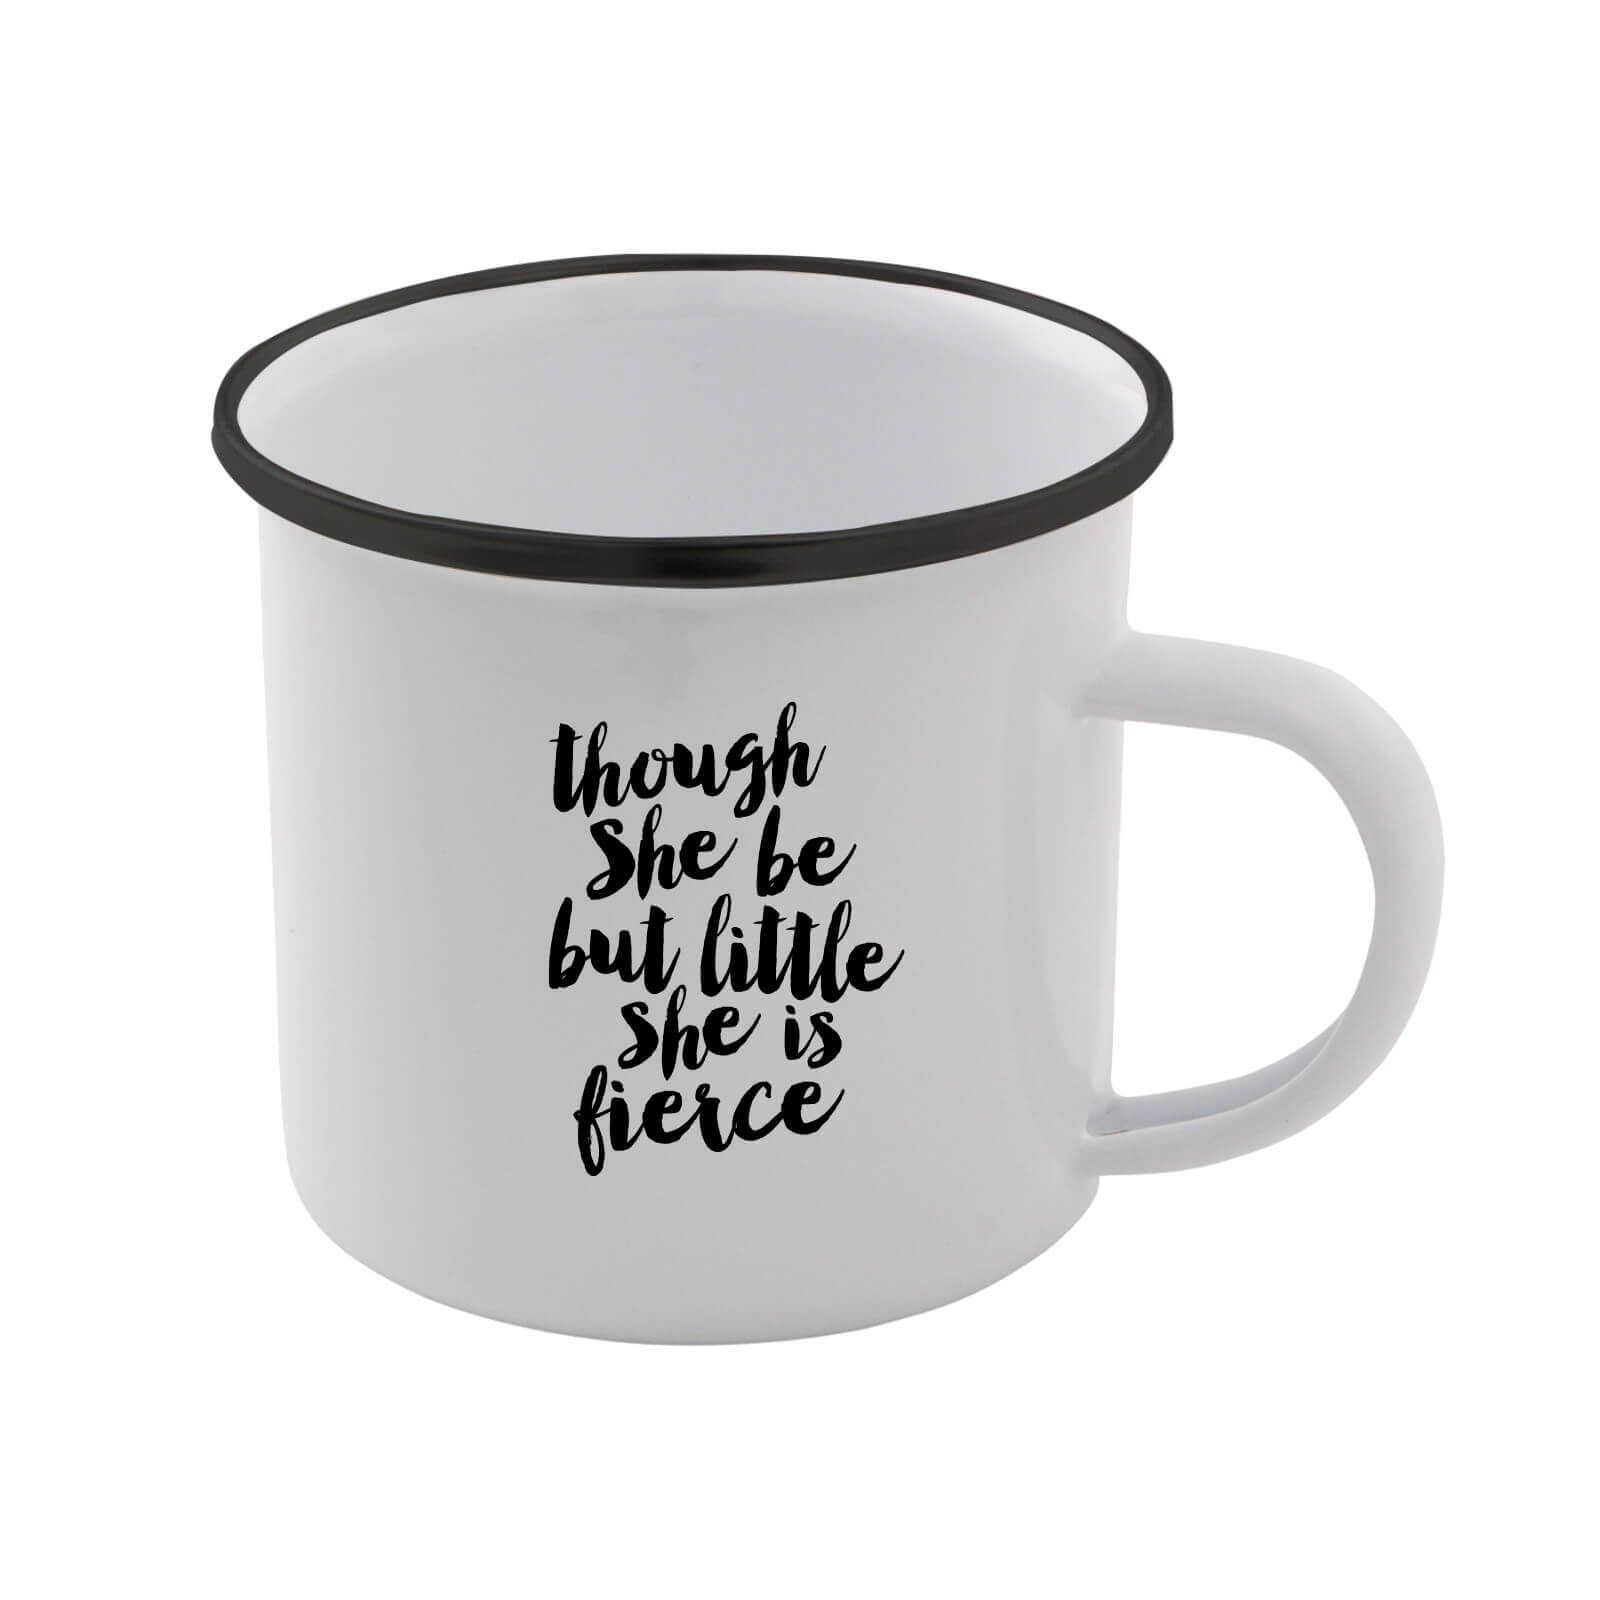 The Motivated Type Though She Be But Little She Is Fierce Enamel Mug